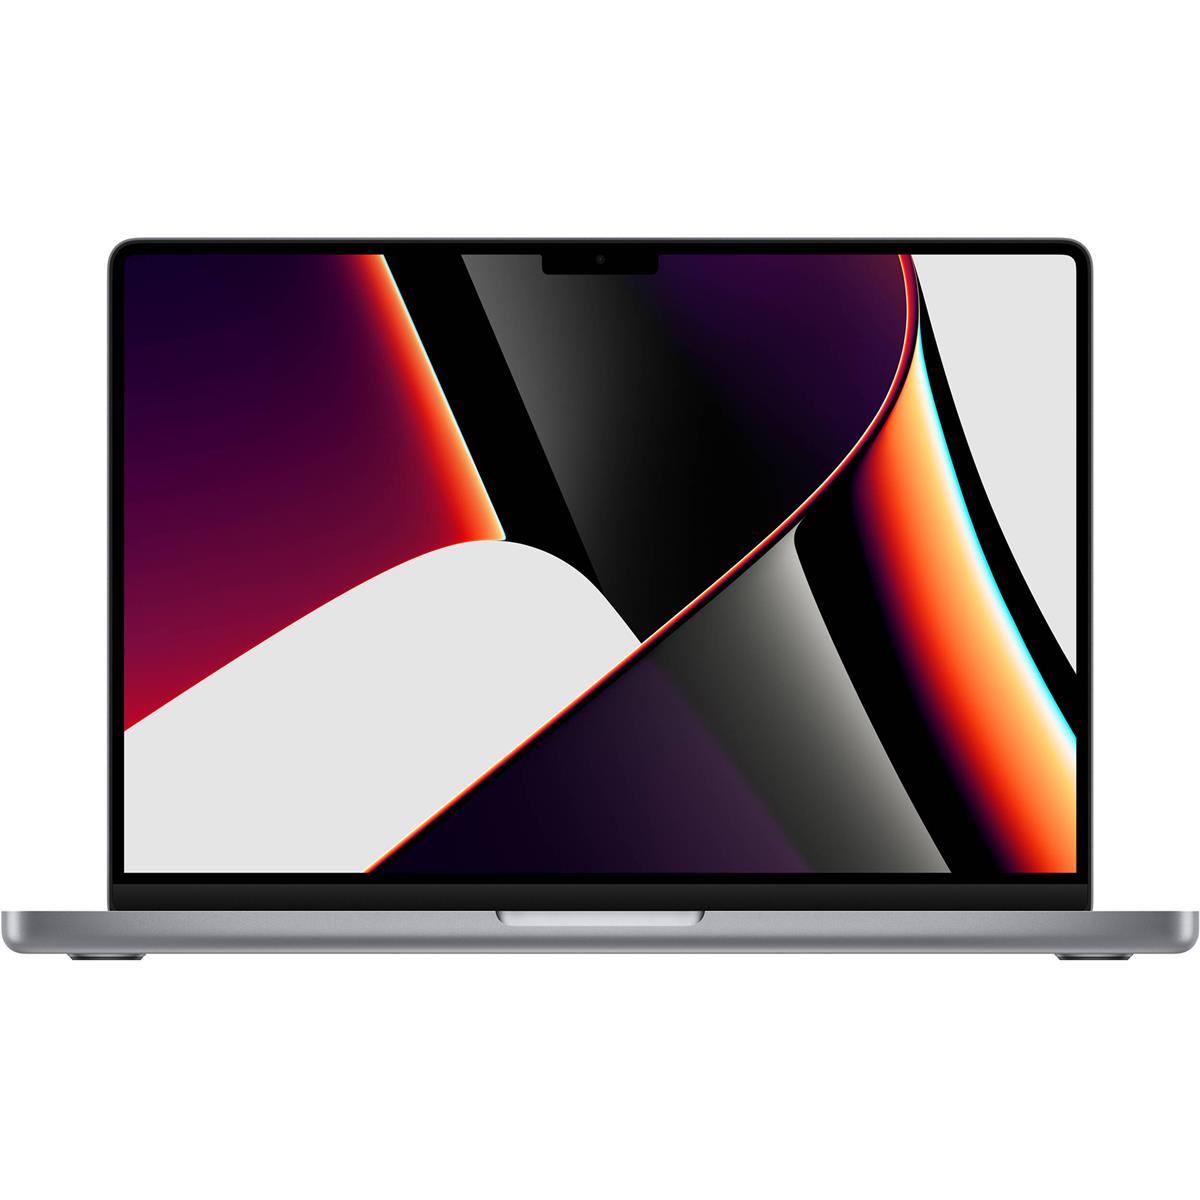 Apple MacBook Pro 14″ with Liquid Retina XDR Display, M1 Pro Chip with 8-Core CPU and 14-Core GPU, 16GB Memory, 512GB SSD, Space Gray, Late 2021